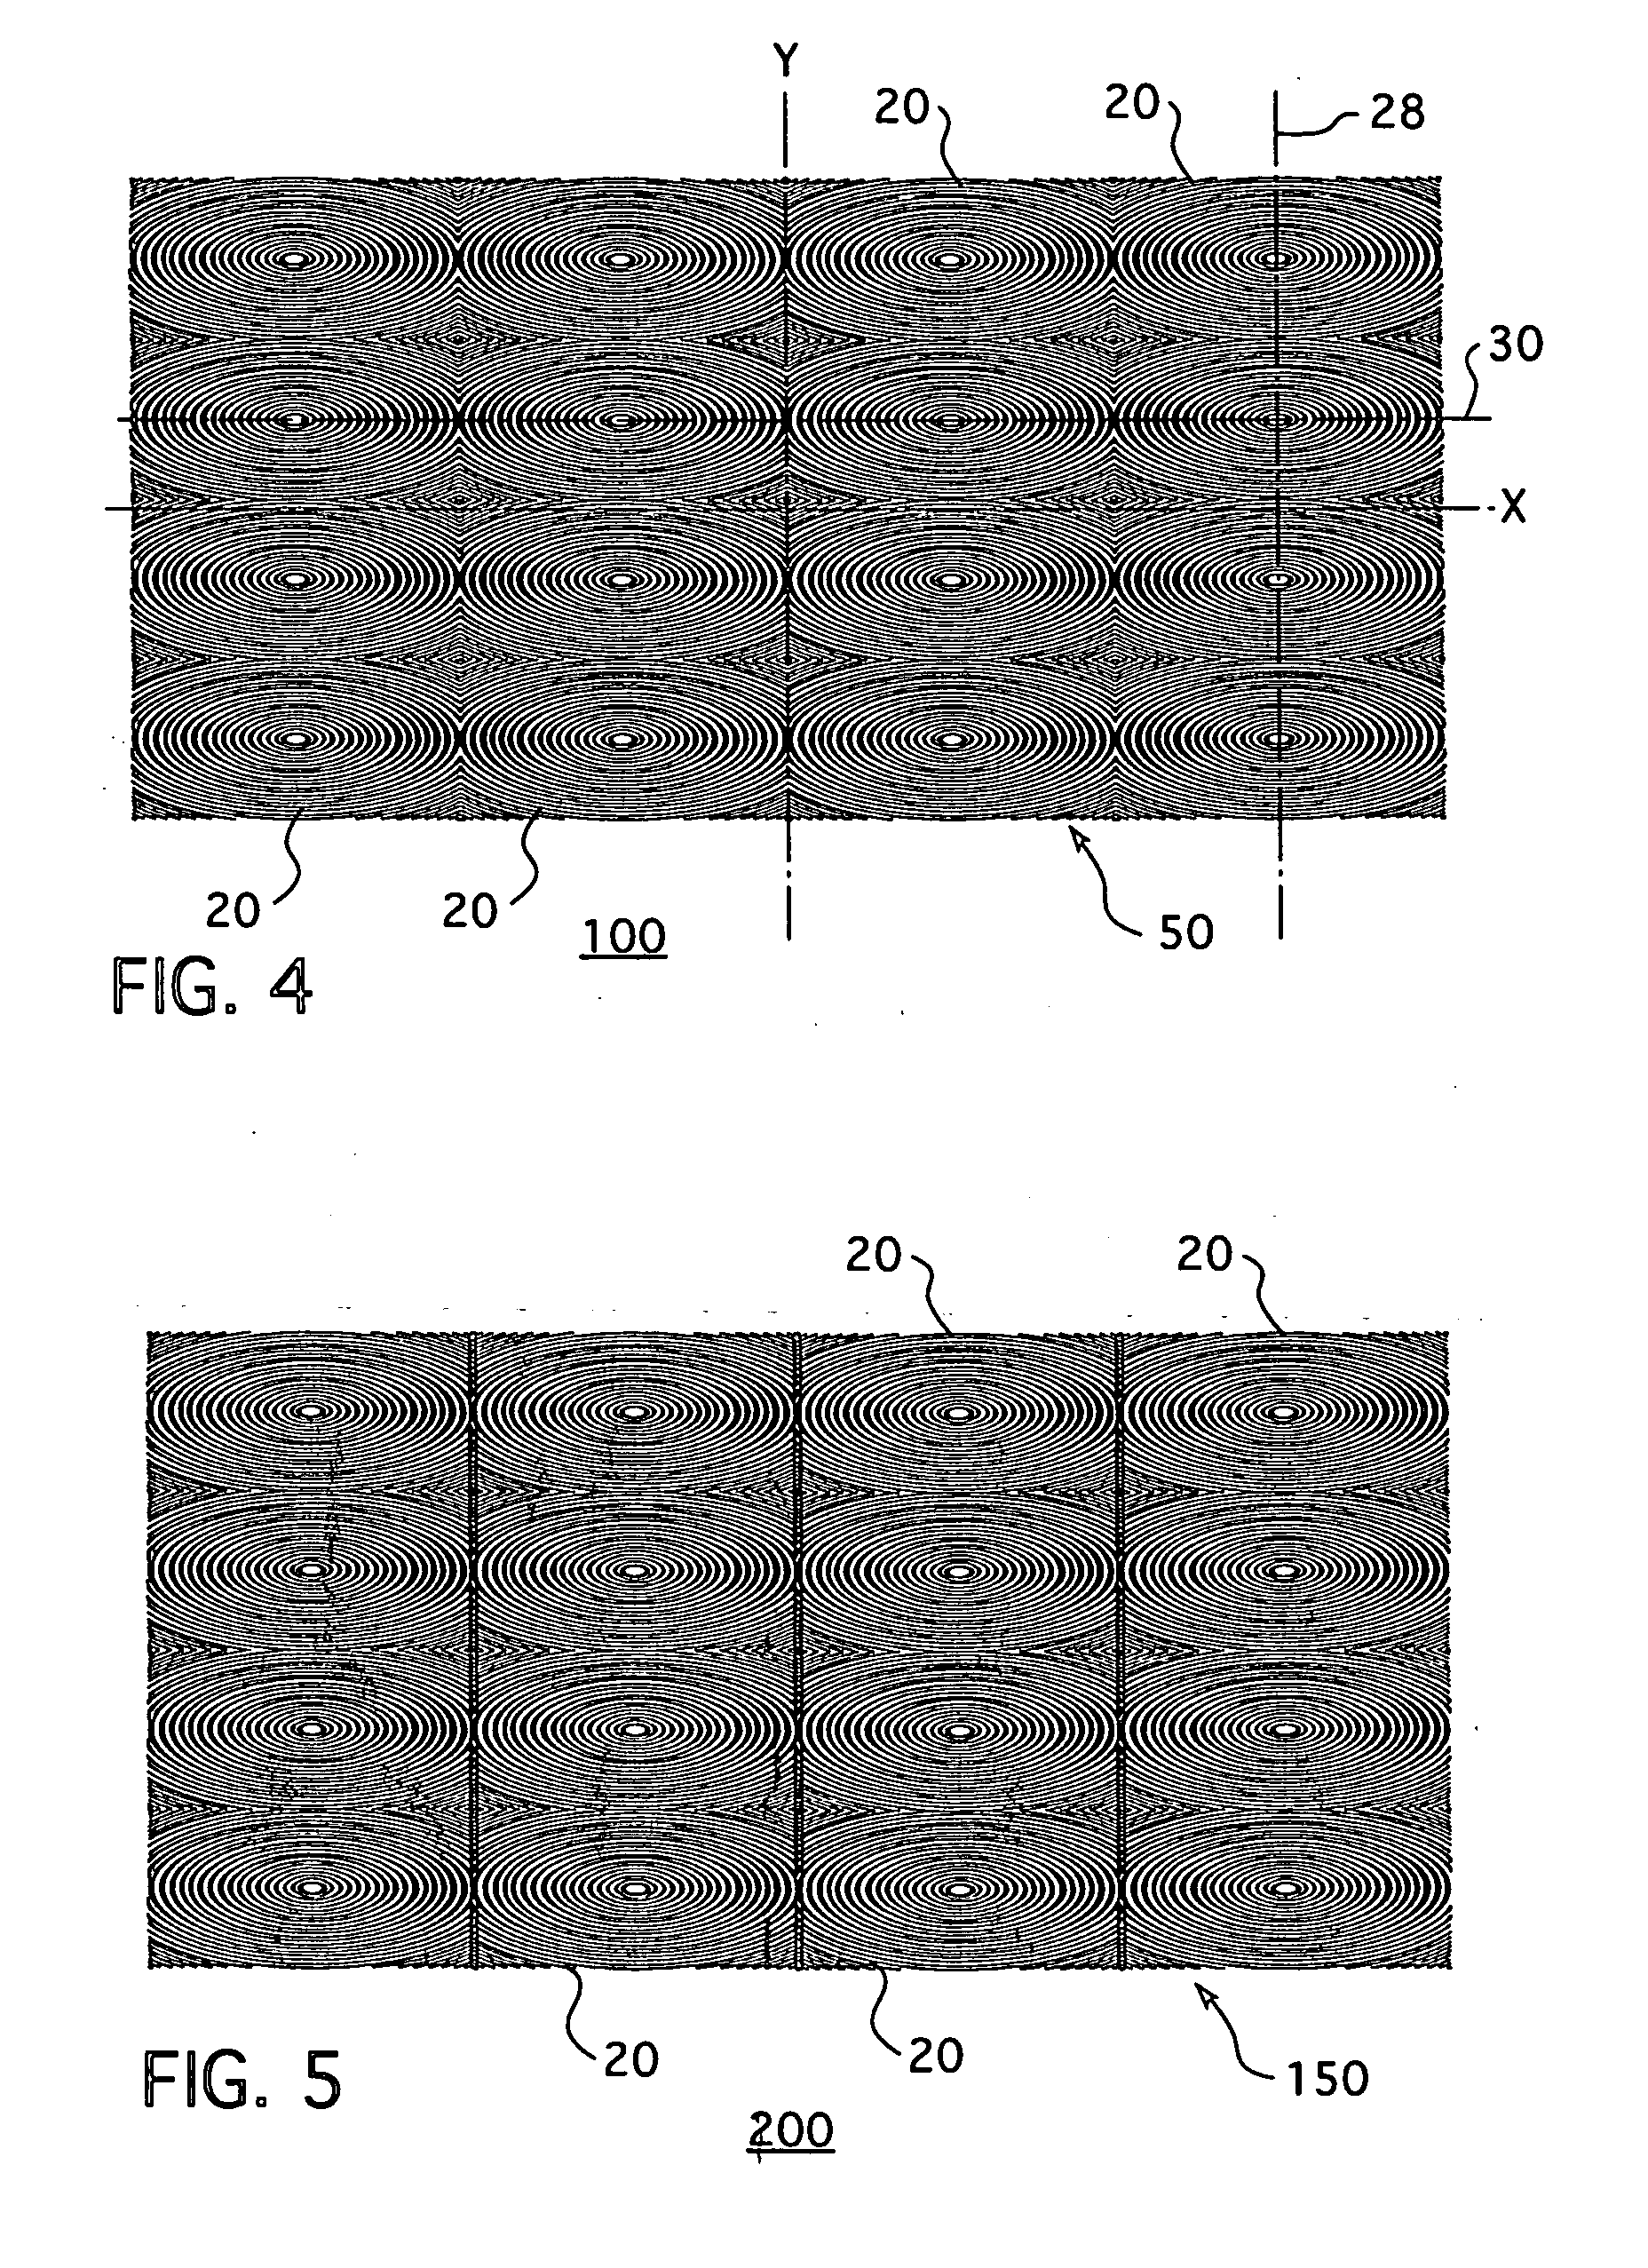 Diffraction-based optical grating structure and method of creating the same